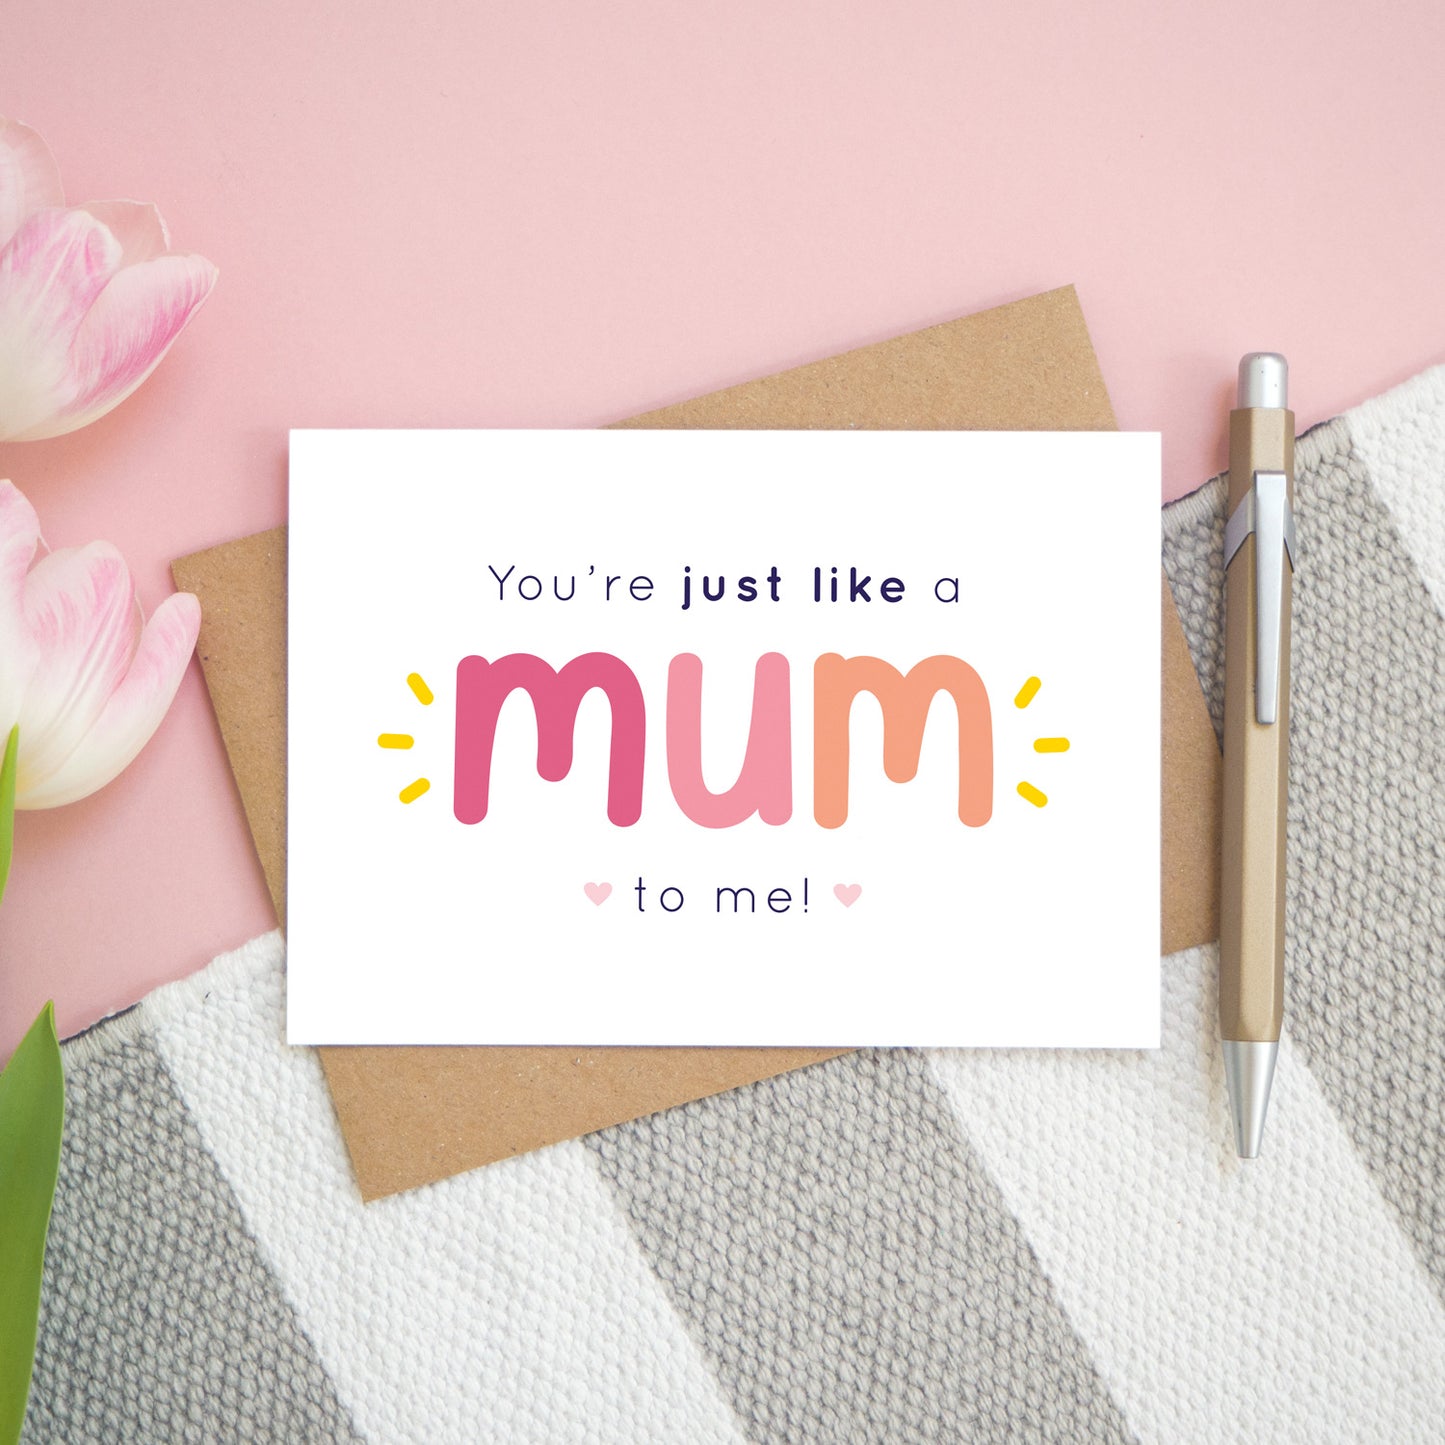 A flatlay set up of the pink and peach version of the 'you're just like a mum to me' card. It is landscape in orientation and is photographed next to a pen and pink tulips for scale.